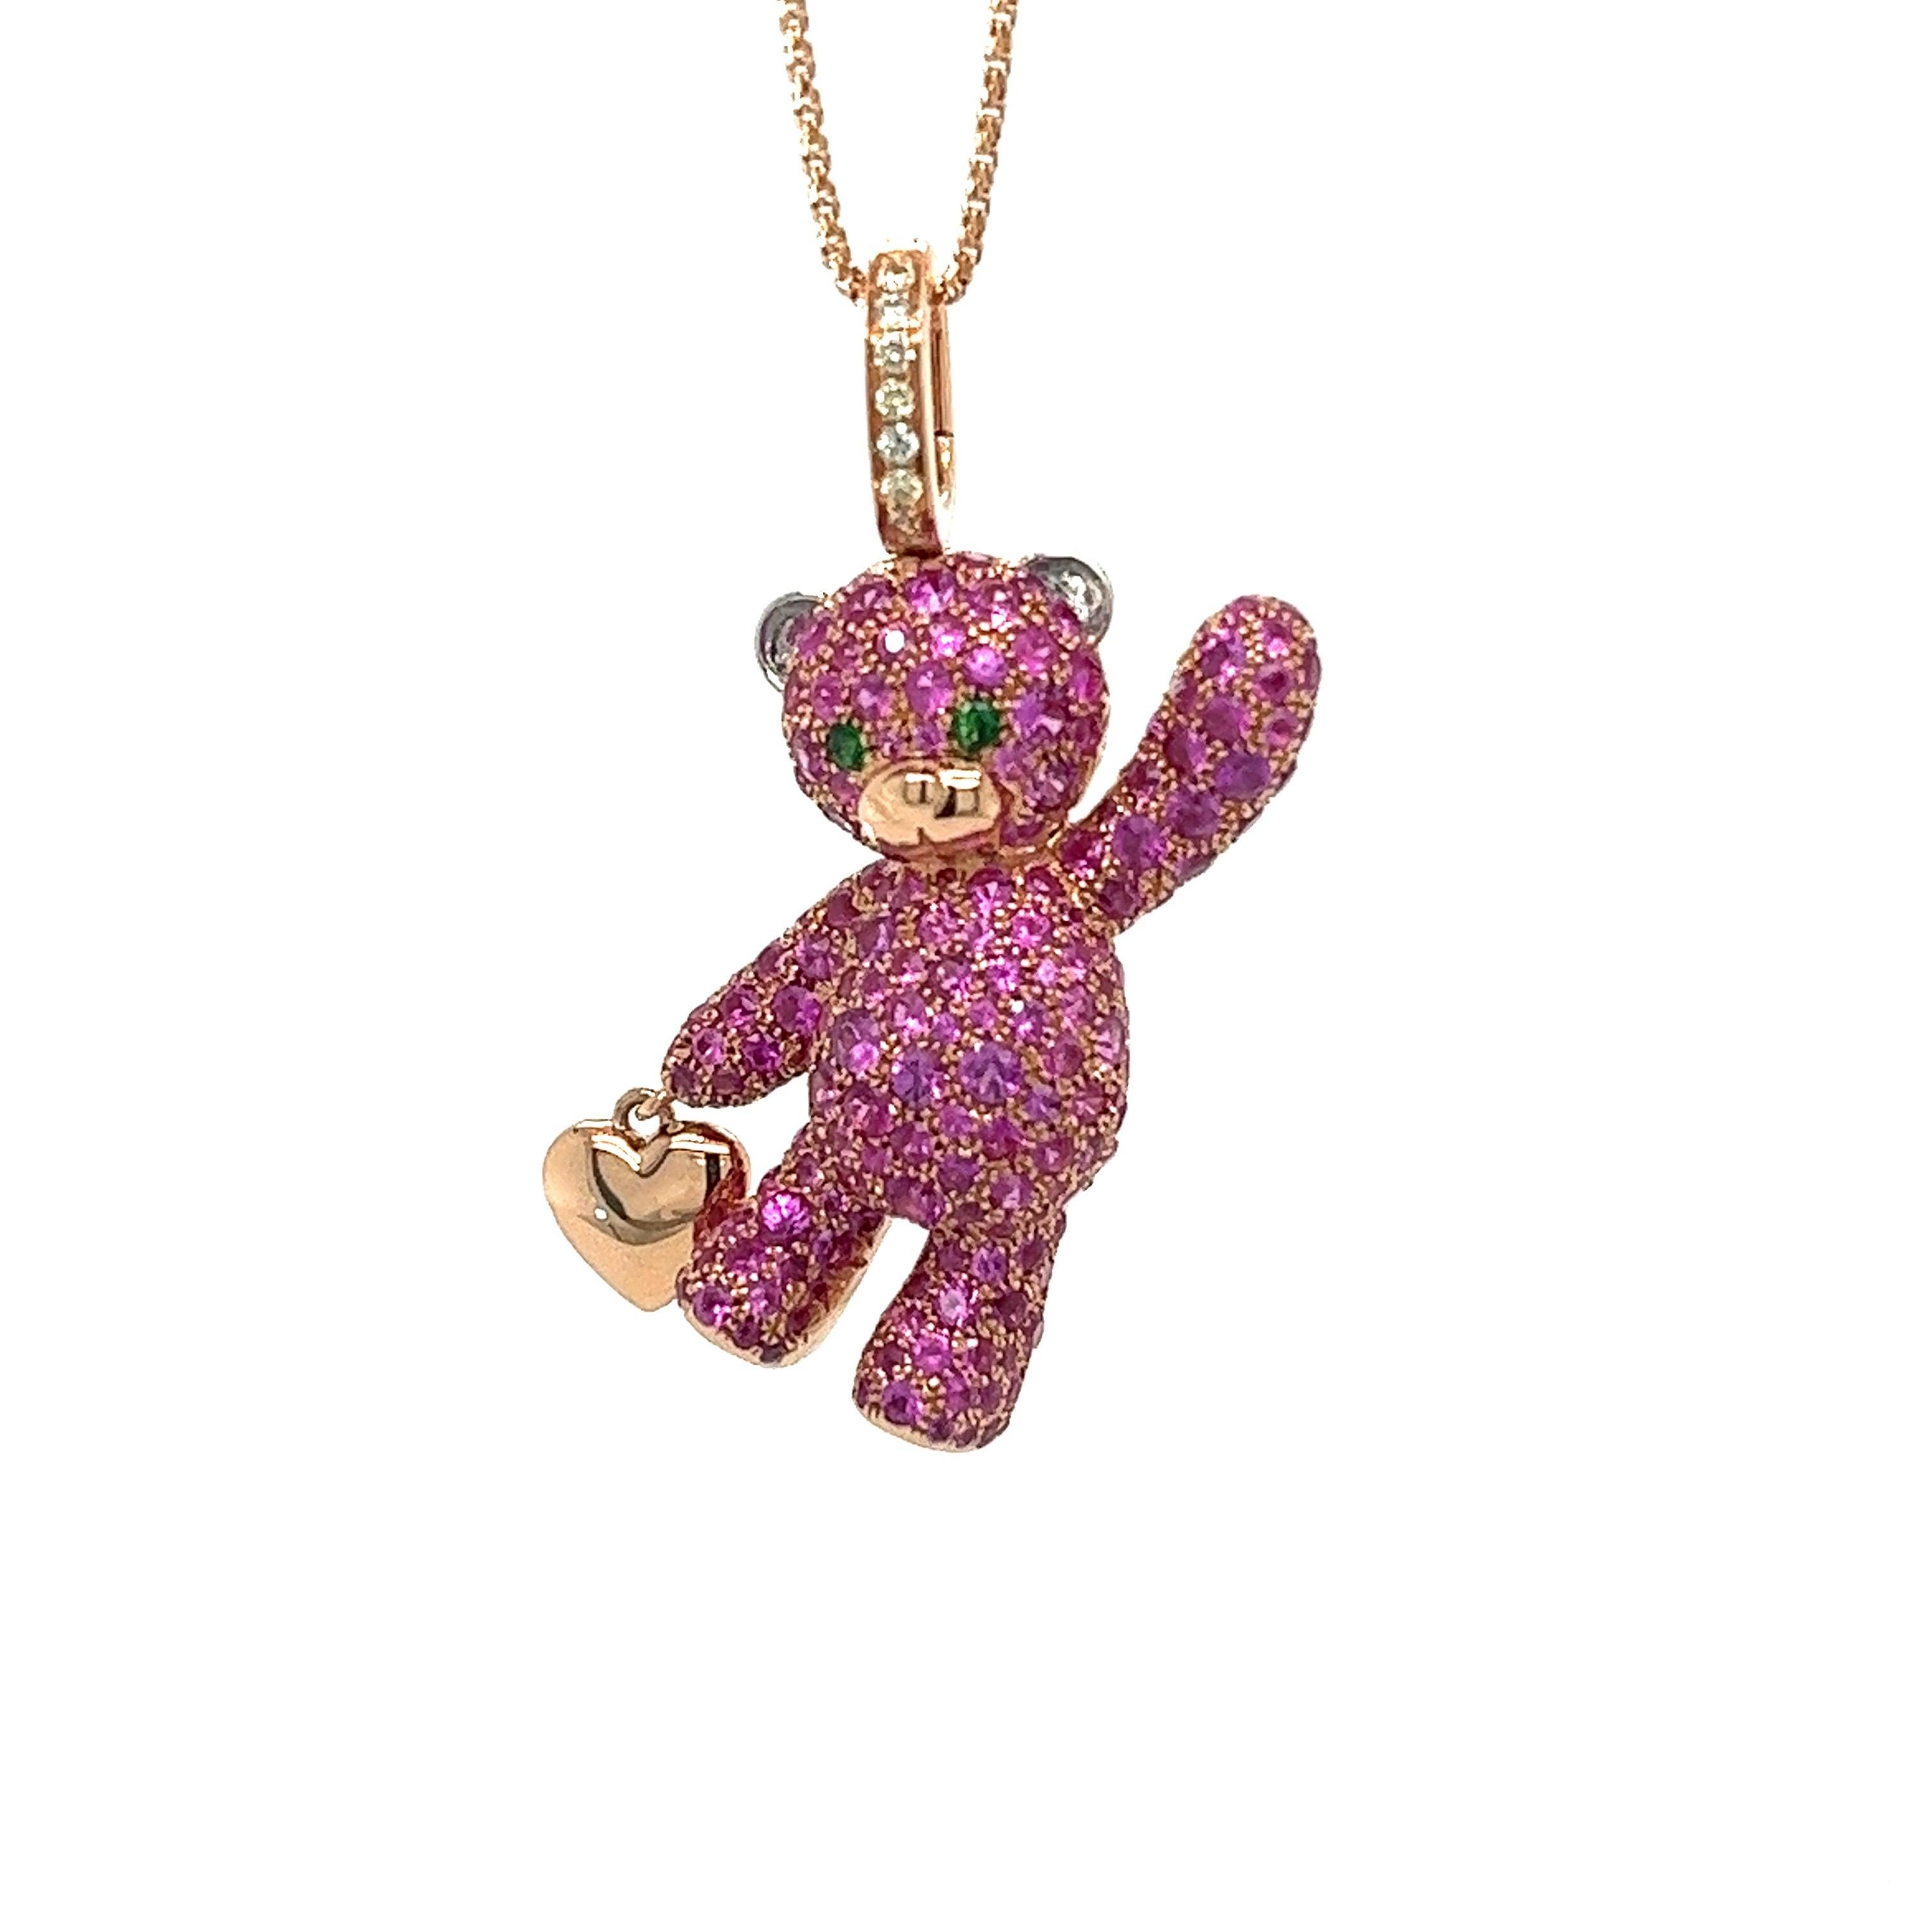 18K Gold Bear Necklace with Fancy Diamonds & Pink Sapphires

7 Fancy Diamonds 0.06 CT
2 Green Garnet 0.04 CT
202 Pink Sapphires 3.10 CT
18K Rose Gold 8.98 GM

Elevate your jewelry collection with this stunning 18K gold necklace adorned with delicate